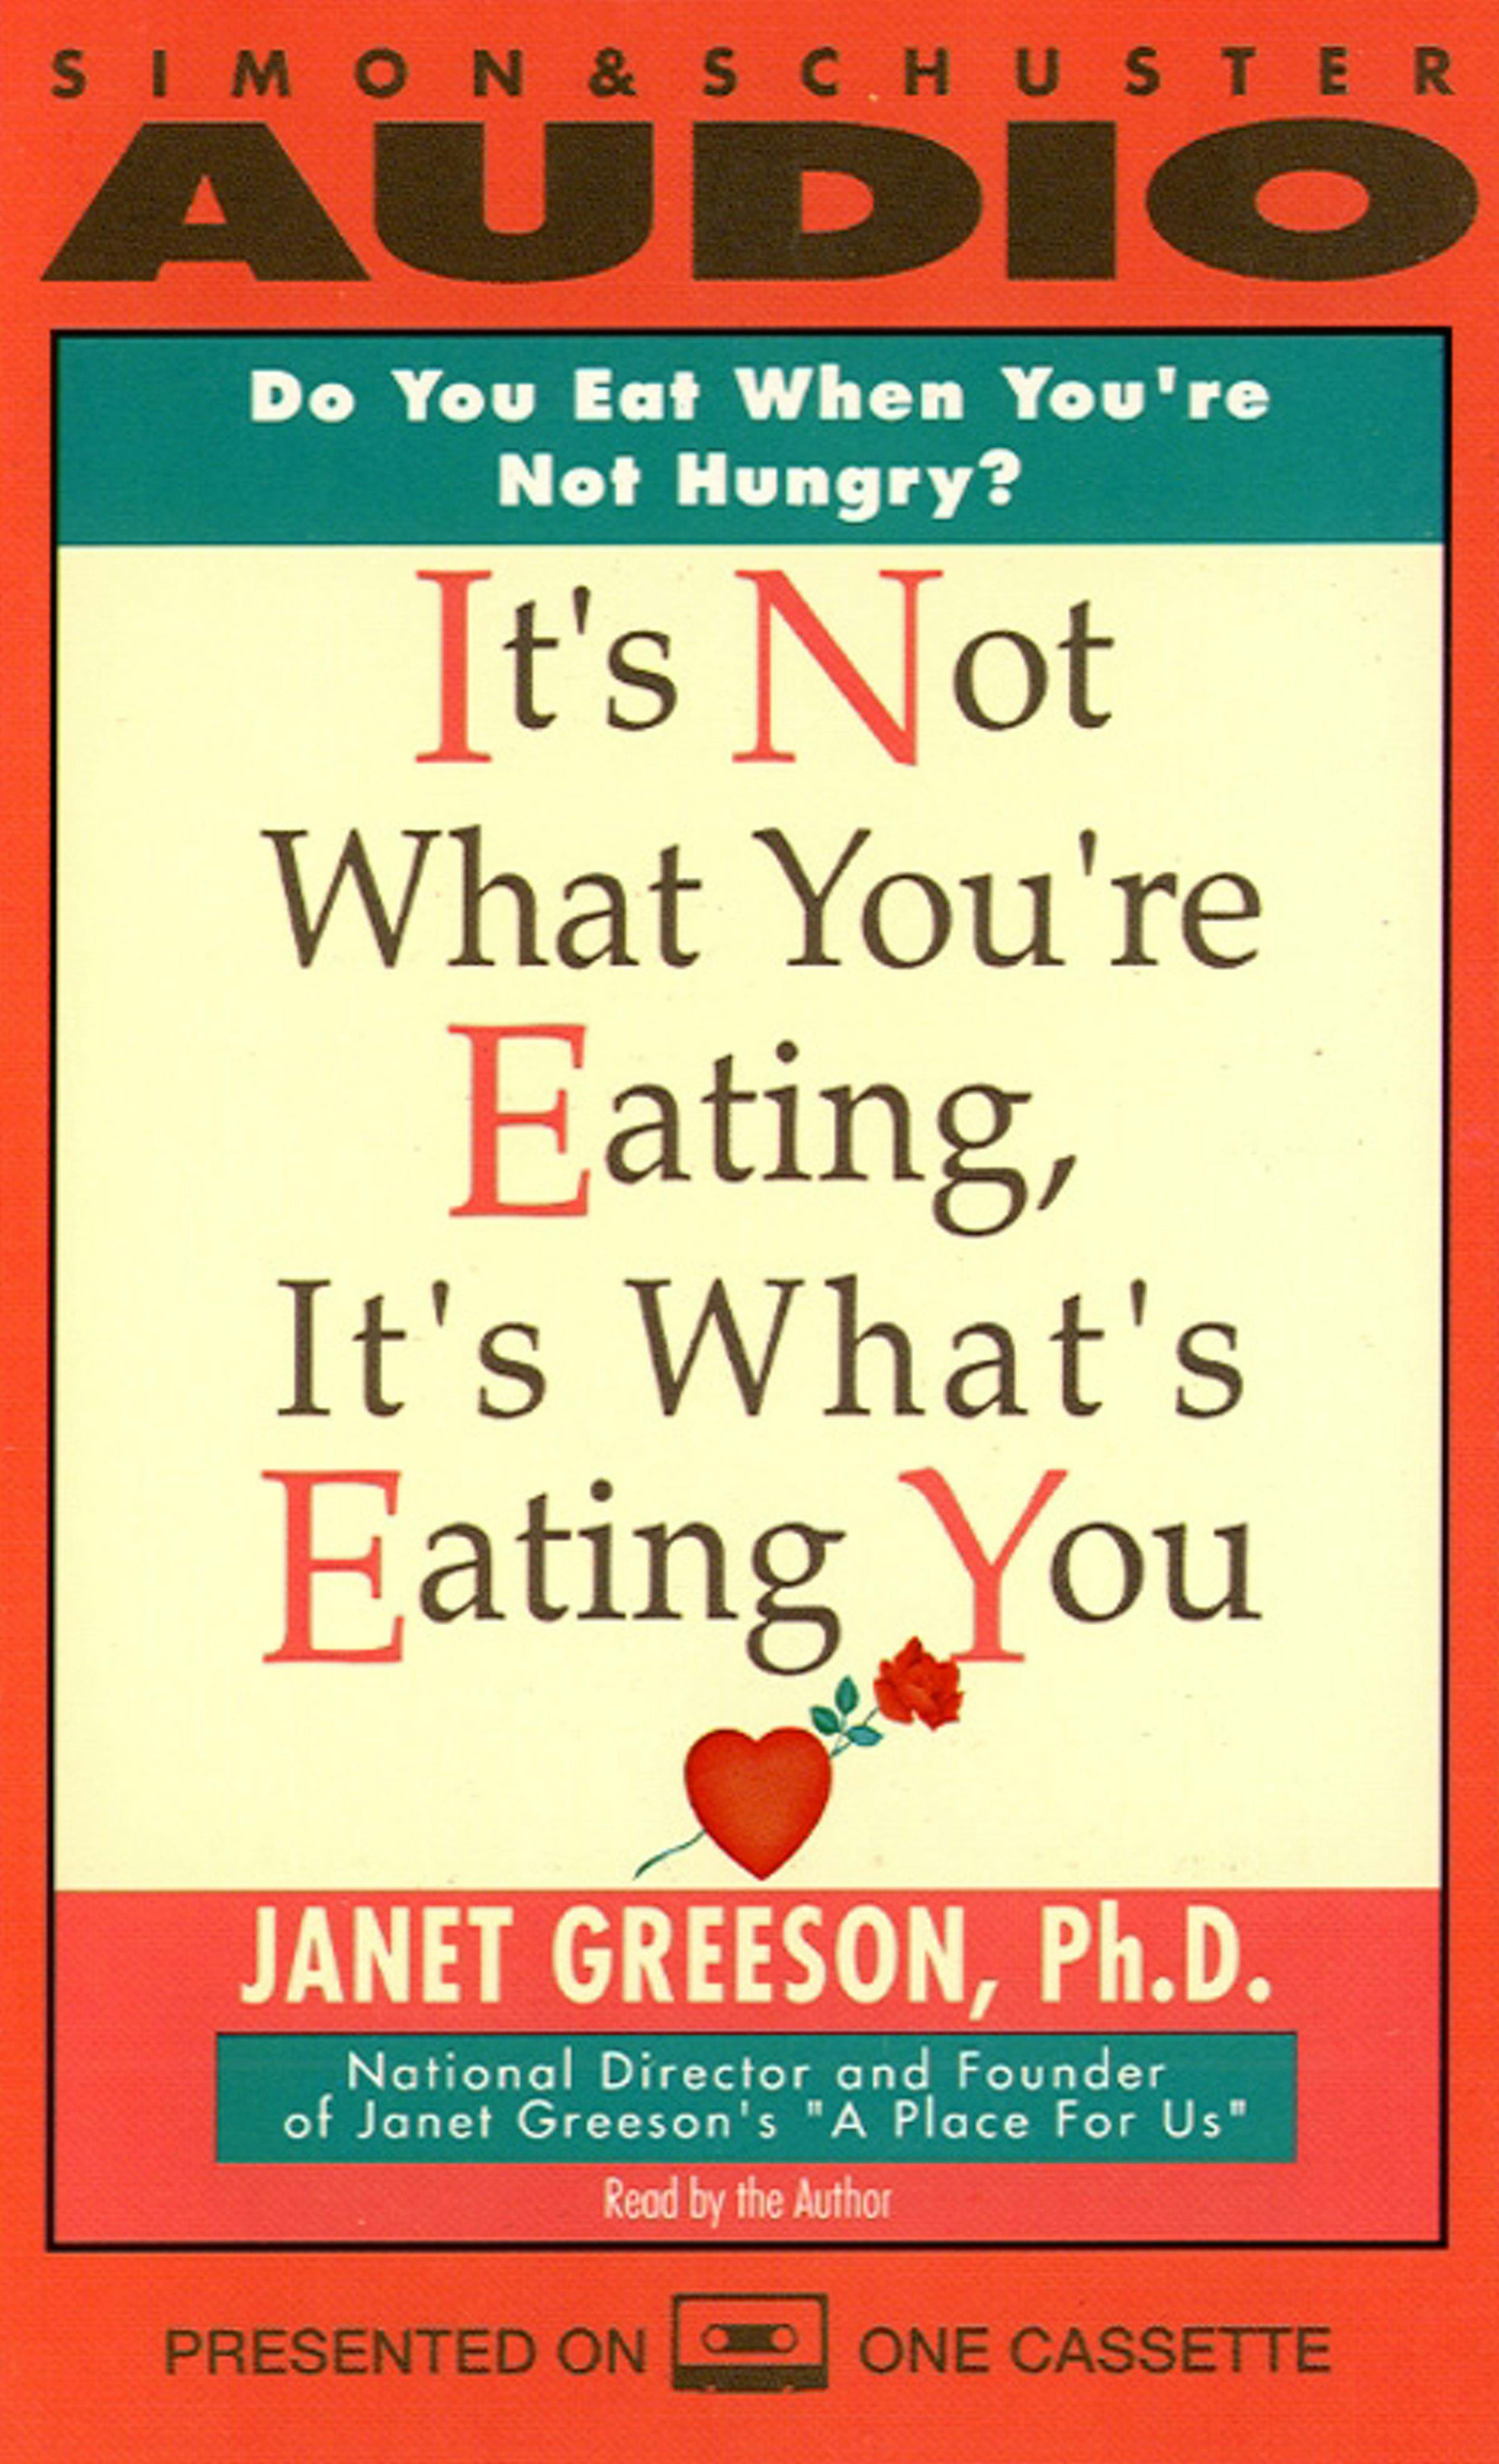 It's Not What You're Eating, It's What's Eating You - Janet Greeson